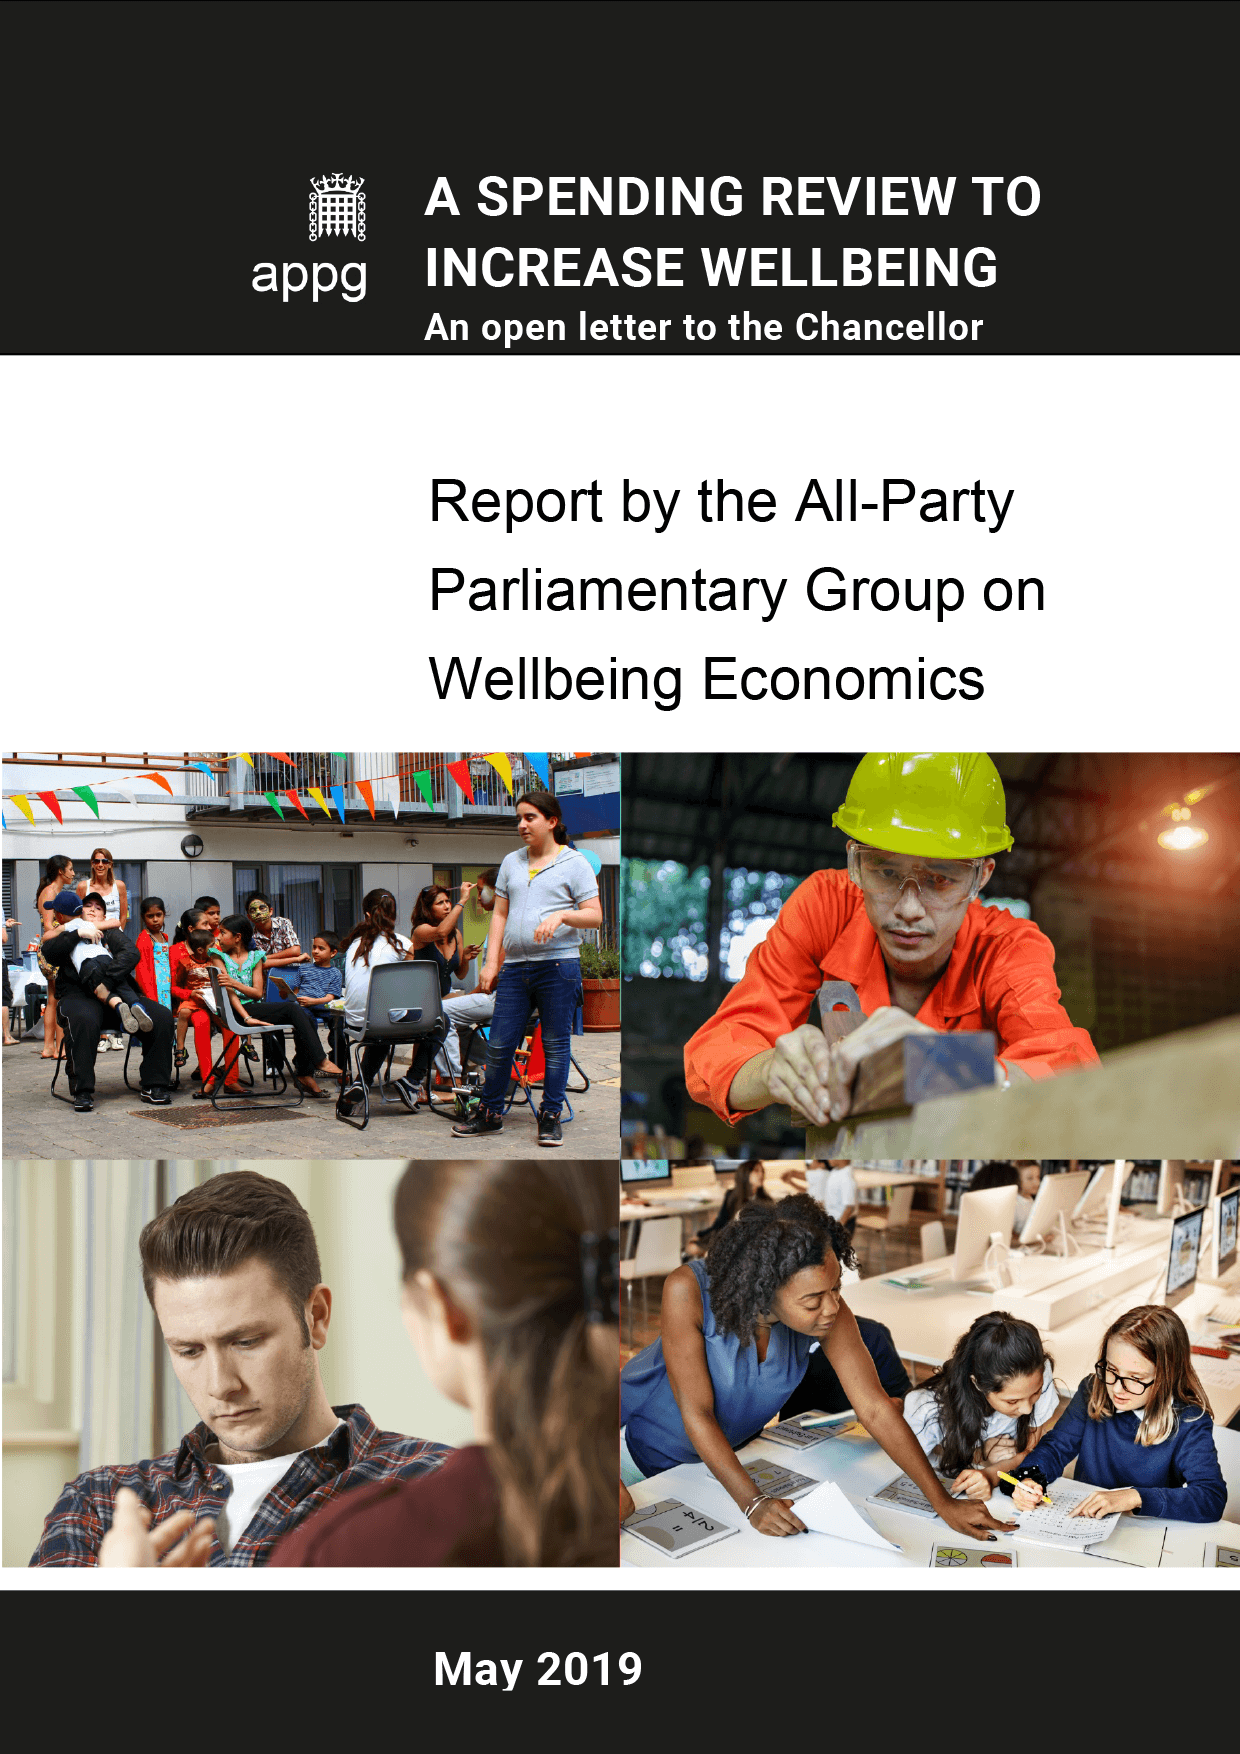 APPG on Wellbeing Economics – a spending review to increase wellbeing